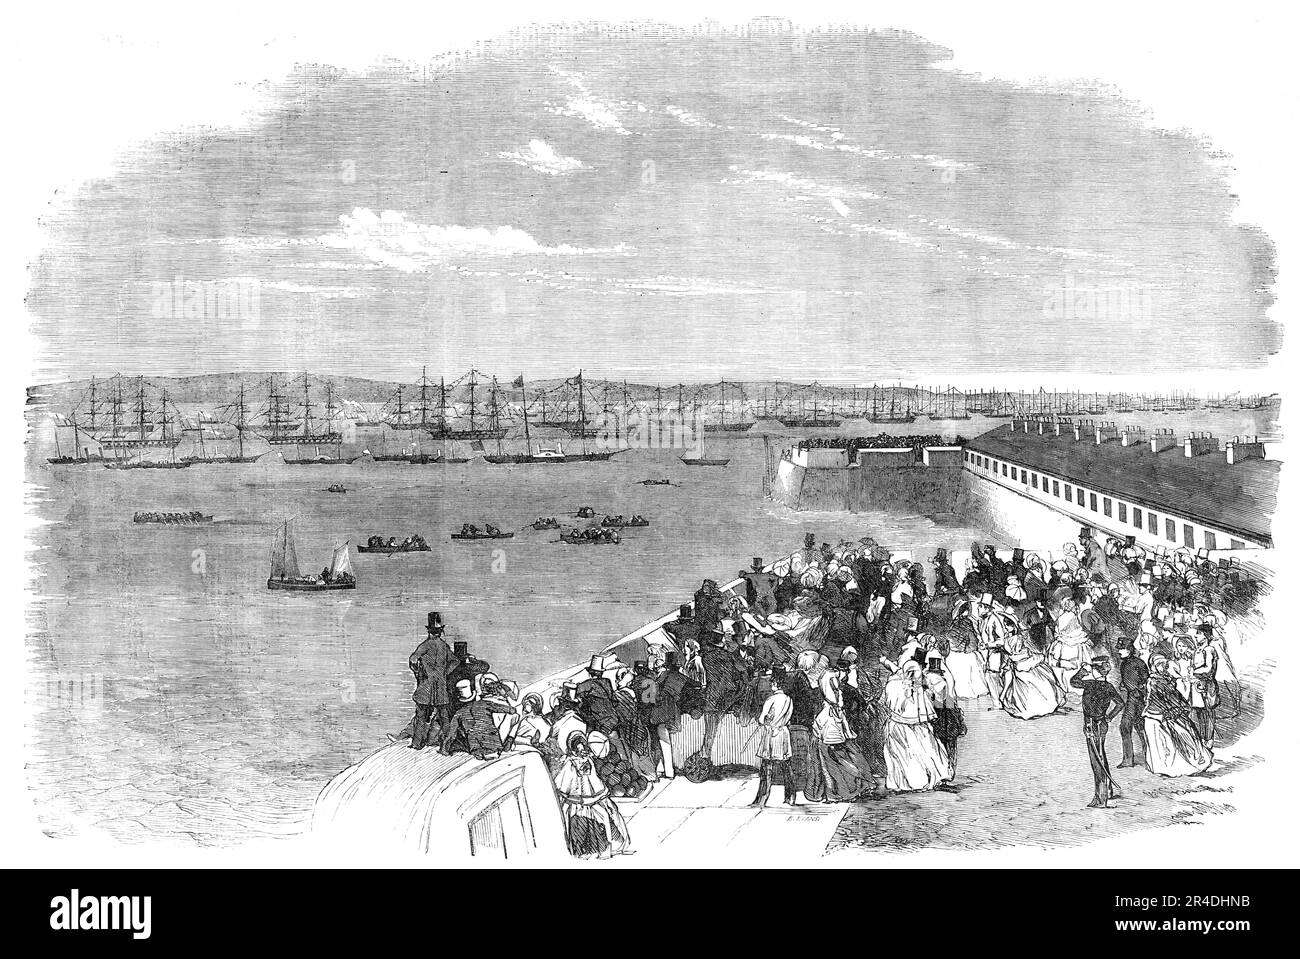 The Naval Review: the Queen's Yacht passing Fort Monckton - drawn by S. Read, 1856. Queen Victoria attends a display by warships of the Royal Navy off the coast of Hampshire. 'The Queen's yacht, emerging from the surrounding smoke, proceeded rapidly past Fort Monckton, meeting everywhere the same enthusiastic reception, and, having rounded into a position to return down the centre line, entered the squadron of gun-boats, disposed in double rows on each side of her course, and majestically proceeded on her way. She glided past the small vessels of the flotilla, passed steam-frigates of various Stock Photo